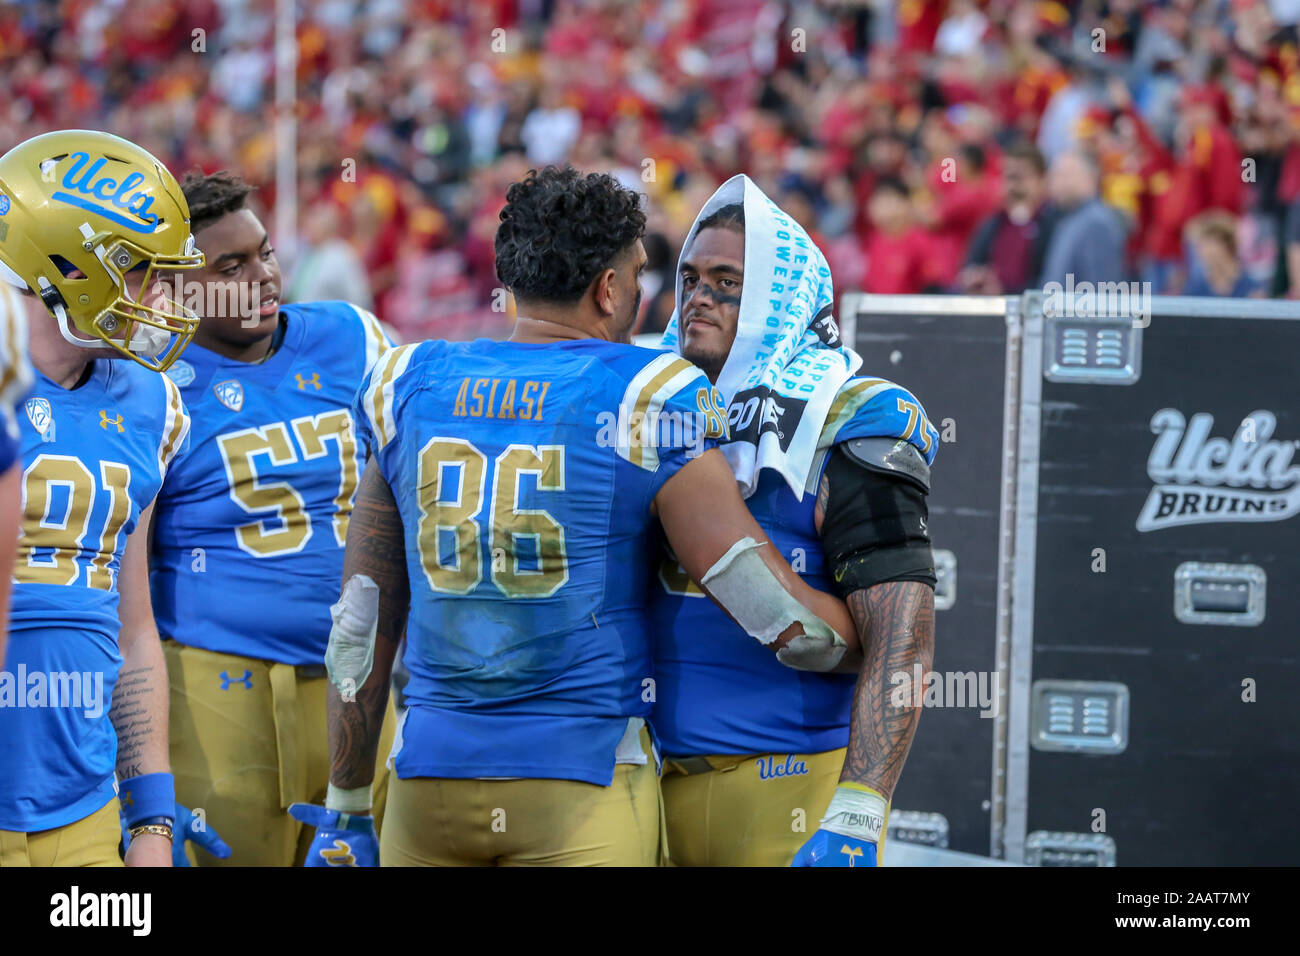 UCLA Bruins tight end Devin Asiasi (86) embracing UCLA Bruins offensive lineman Boss Tagaloa (75) during the UCLA Bruins vs USC Trojans football game at United Airlines Field at the Los Angeles Memorial Coliseum on Saturday November 23, 2019 (Photo by Jevone Moore) Stock Photo